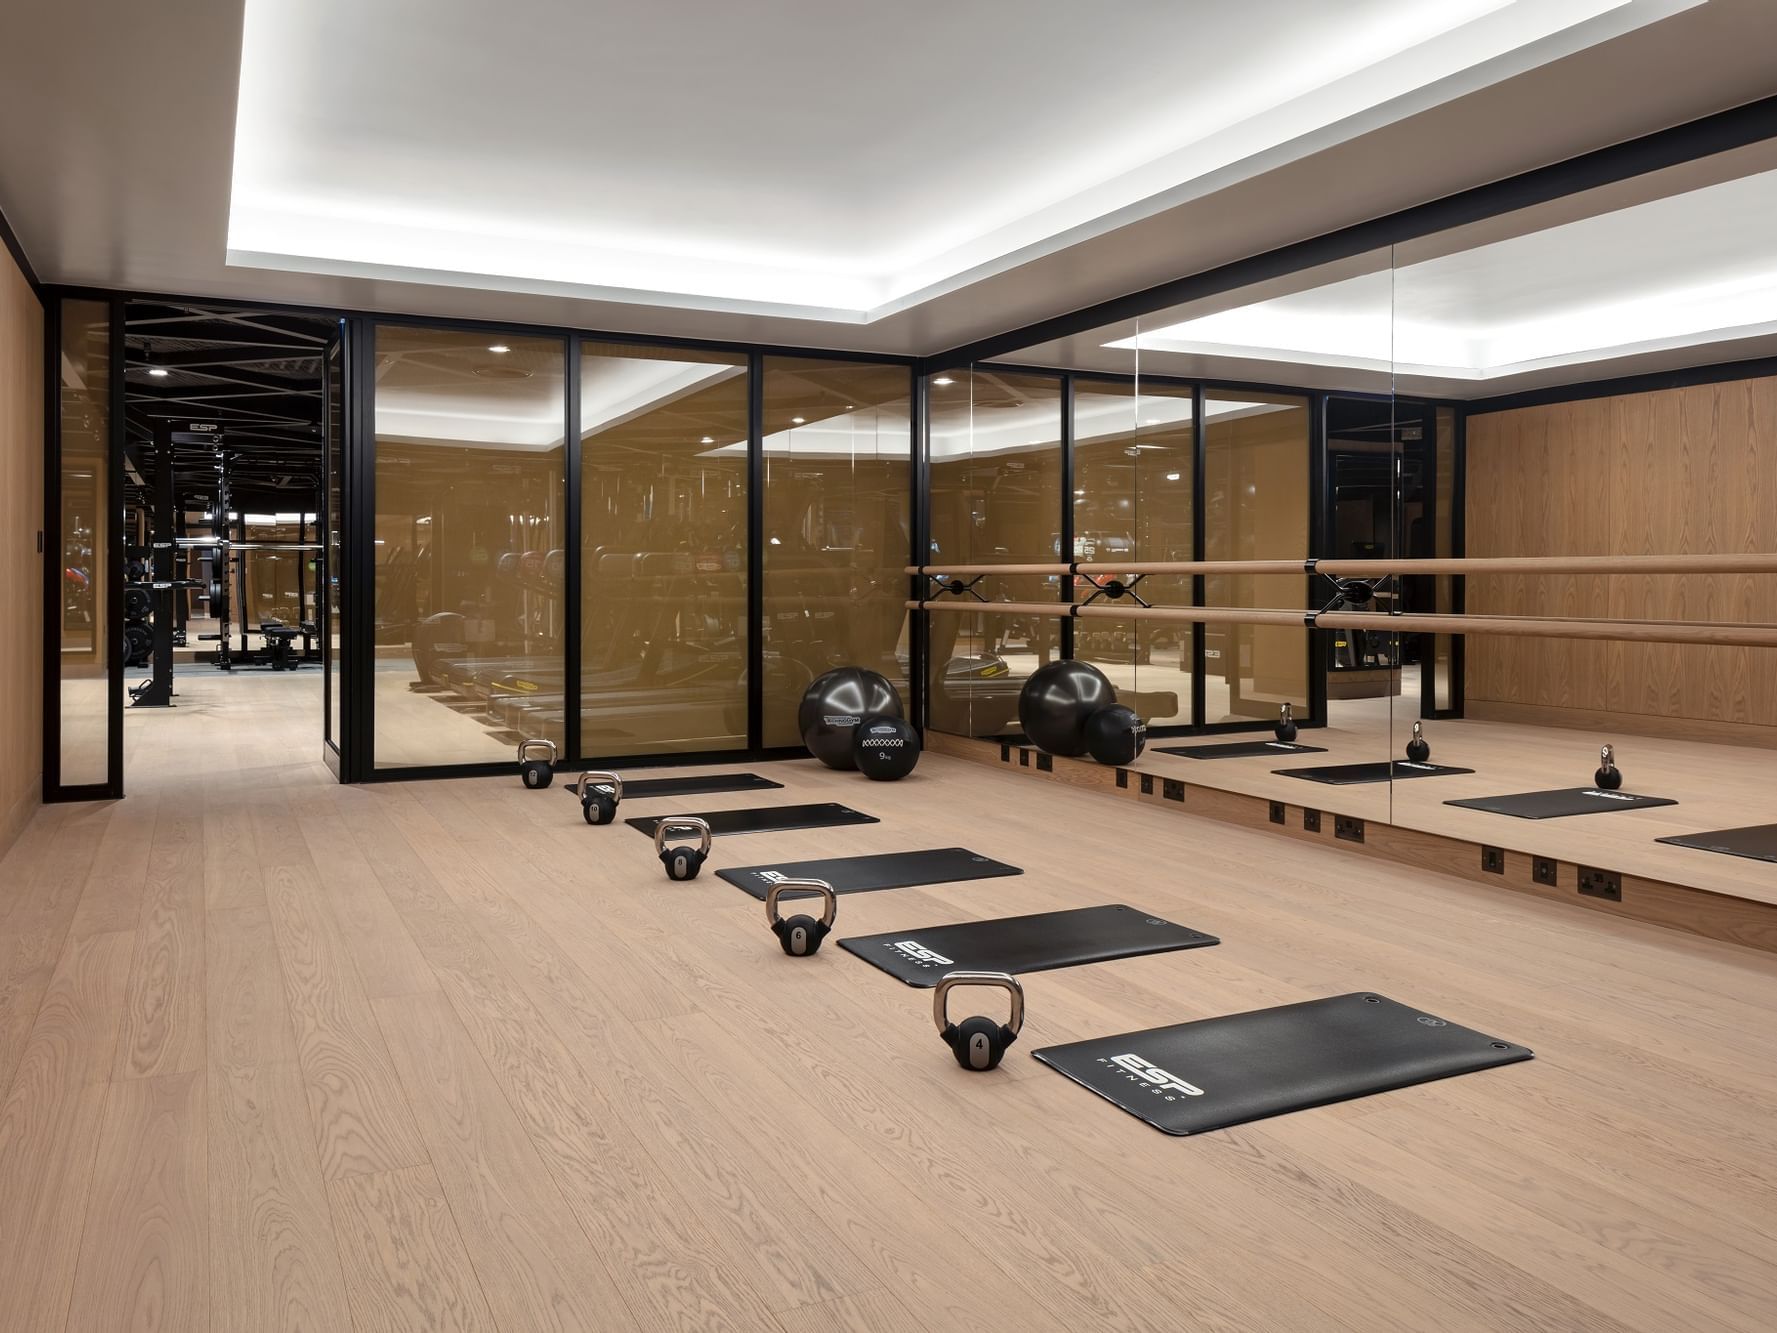 Interior of the cardio area of the Gym at The Londoner Hotel